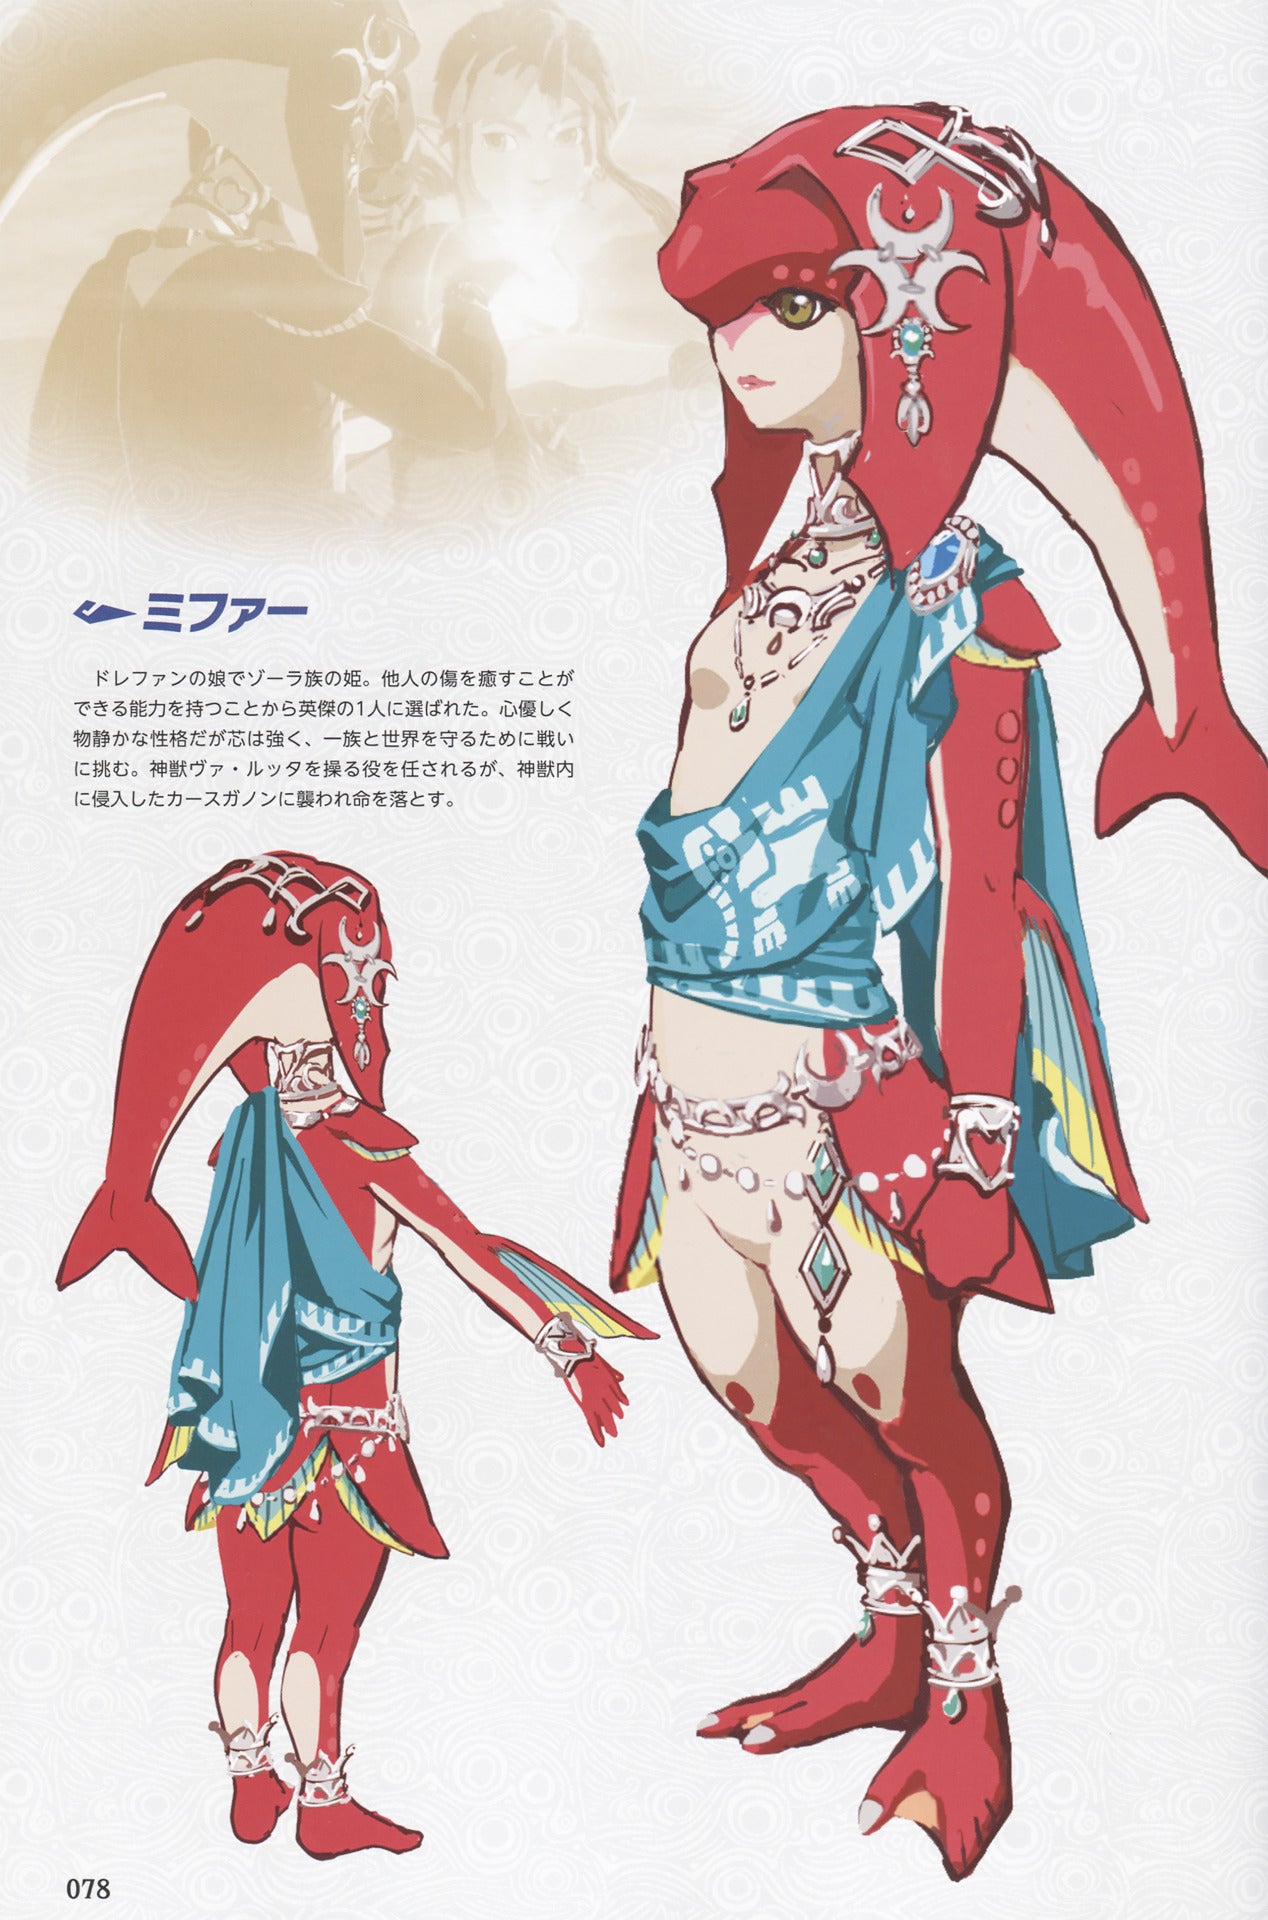 Mipha, from The Legend of Zelda: Breath of the Wild (pre-order)